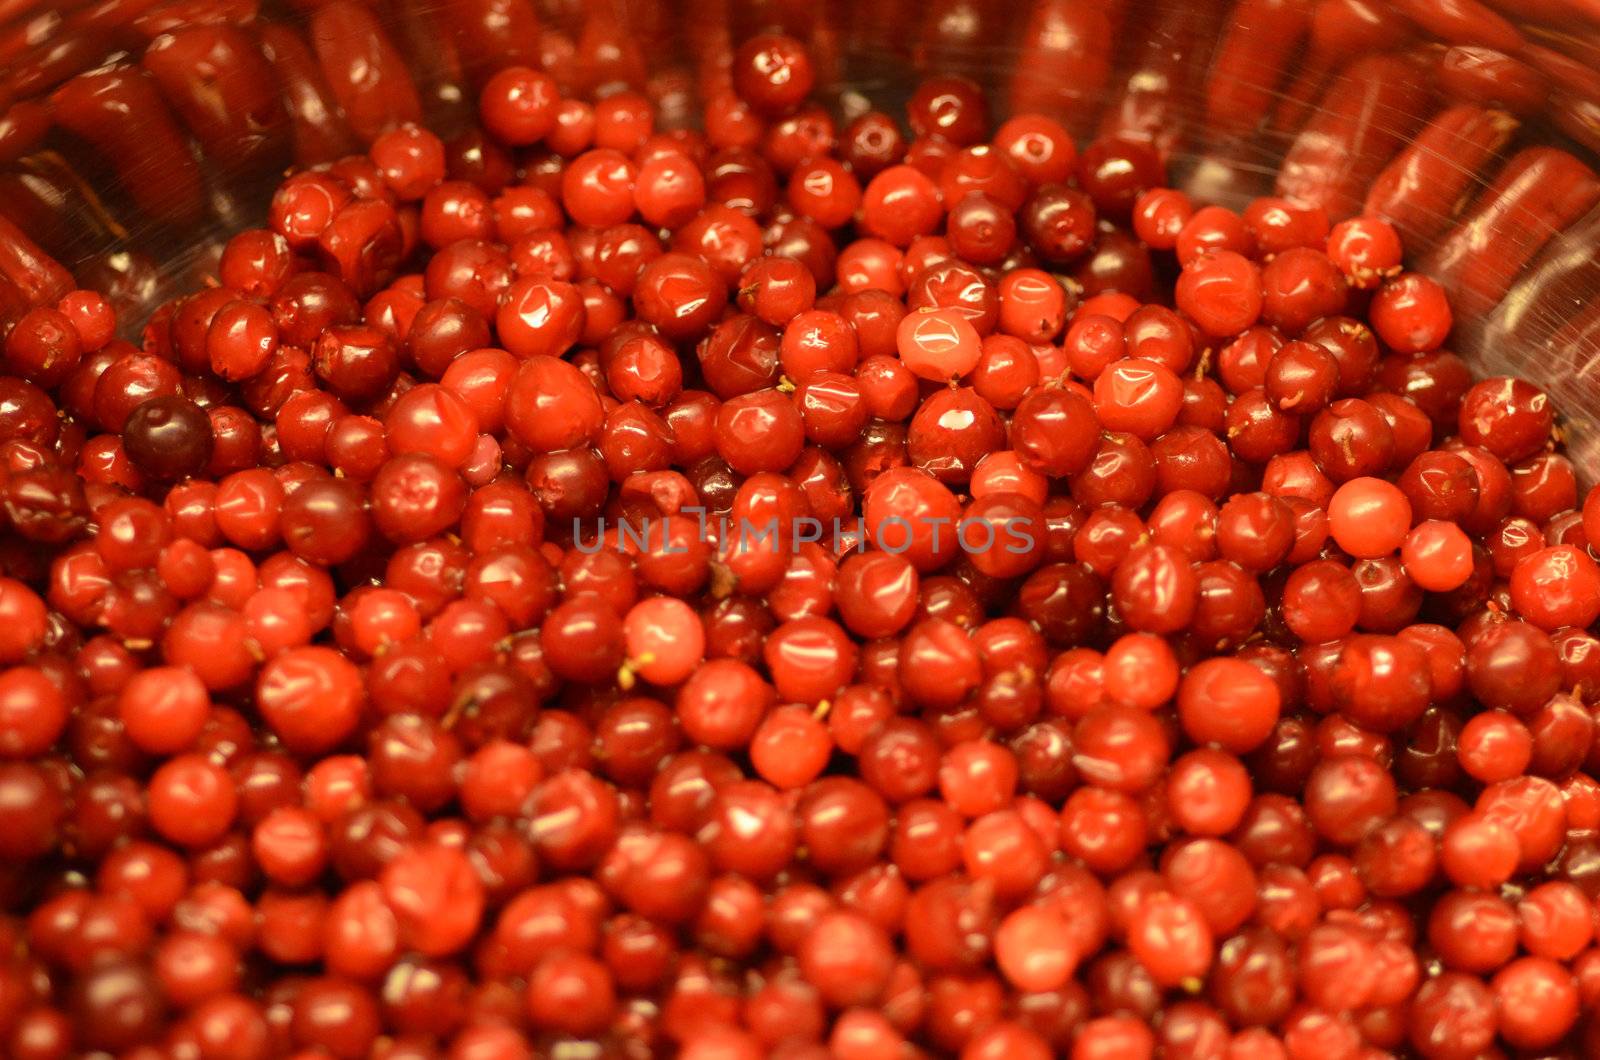 A kettle full of cowberries.